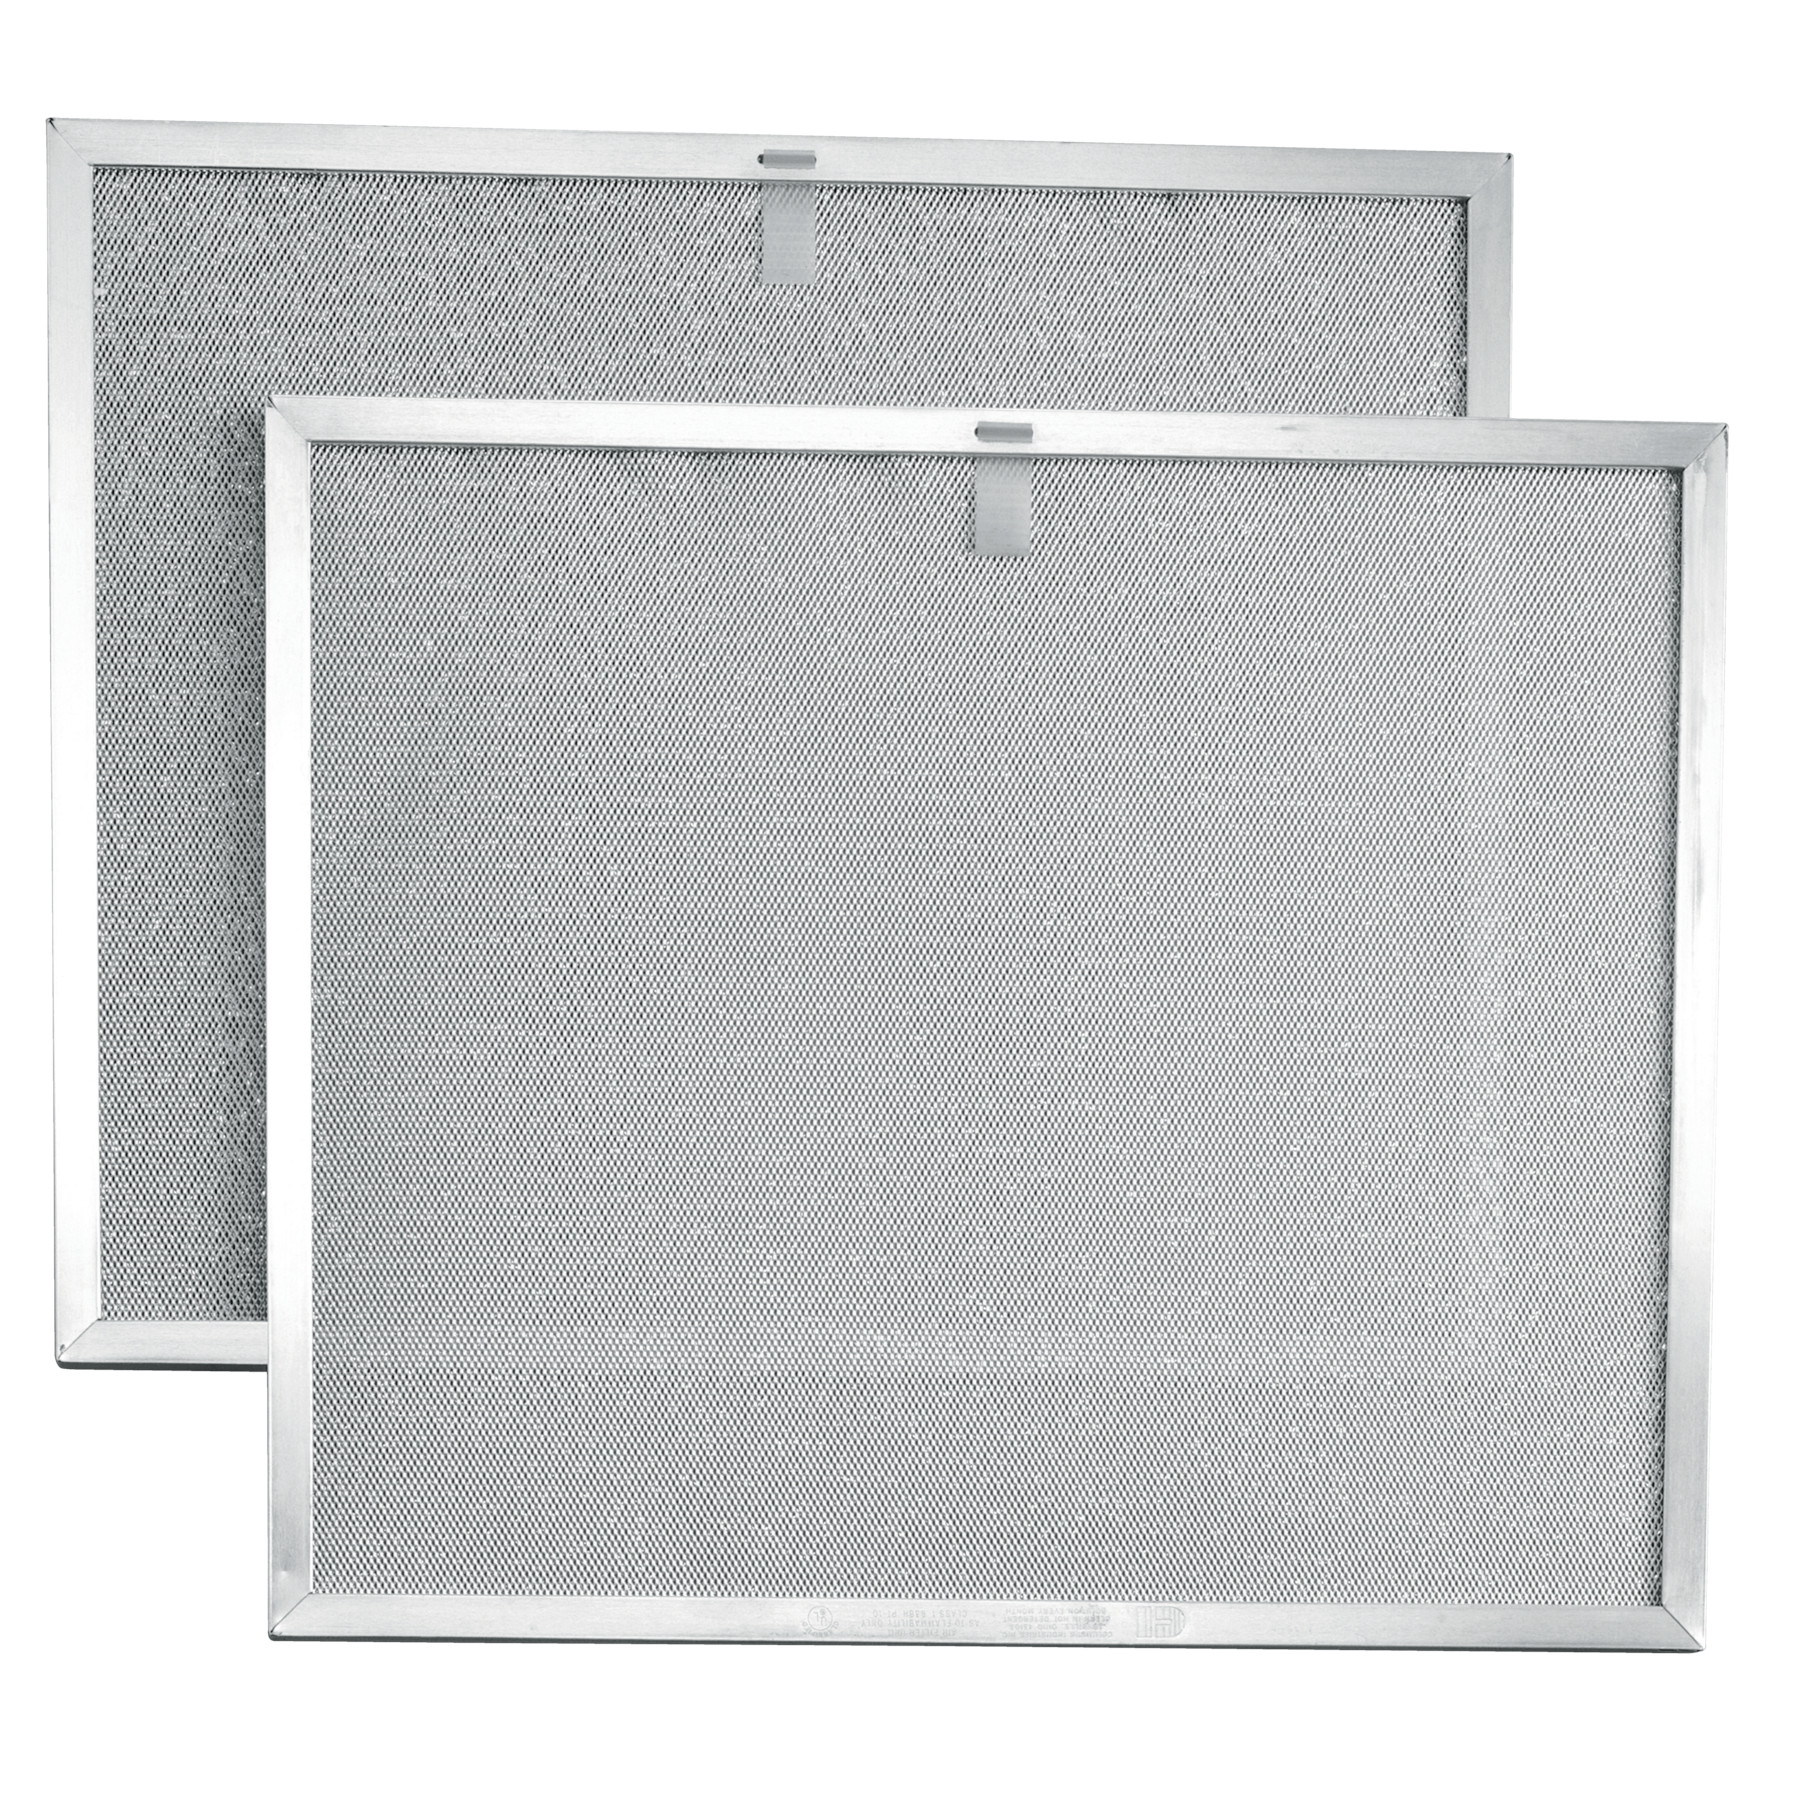 Range Hood Baffle, Hybrid Baffle, Aluminum and Charcoal Replacement Filters